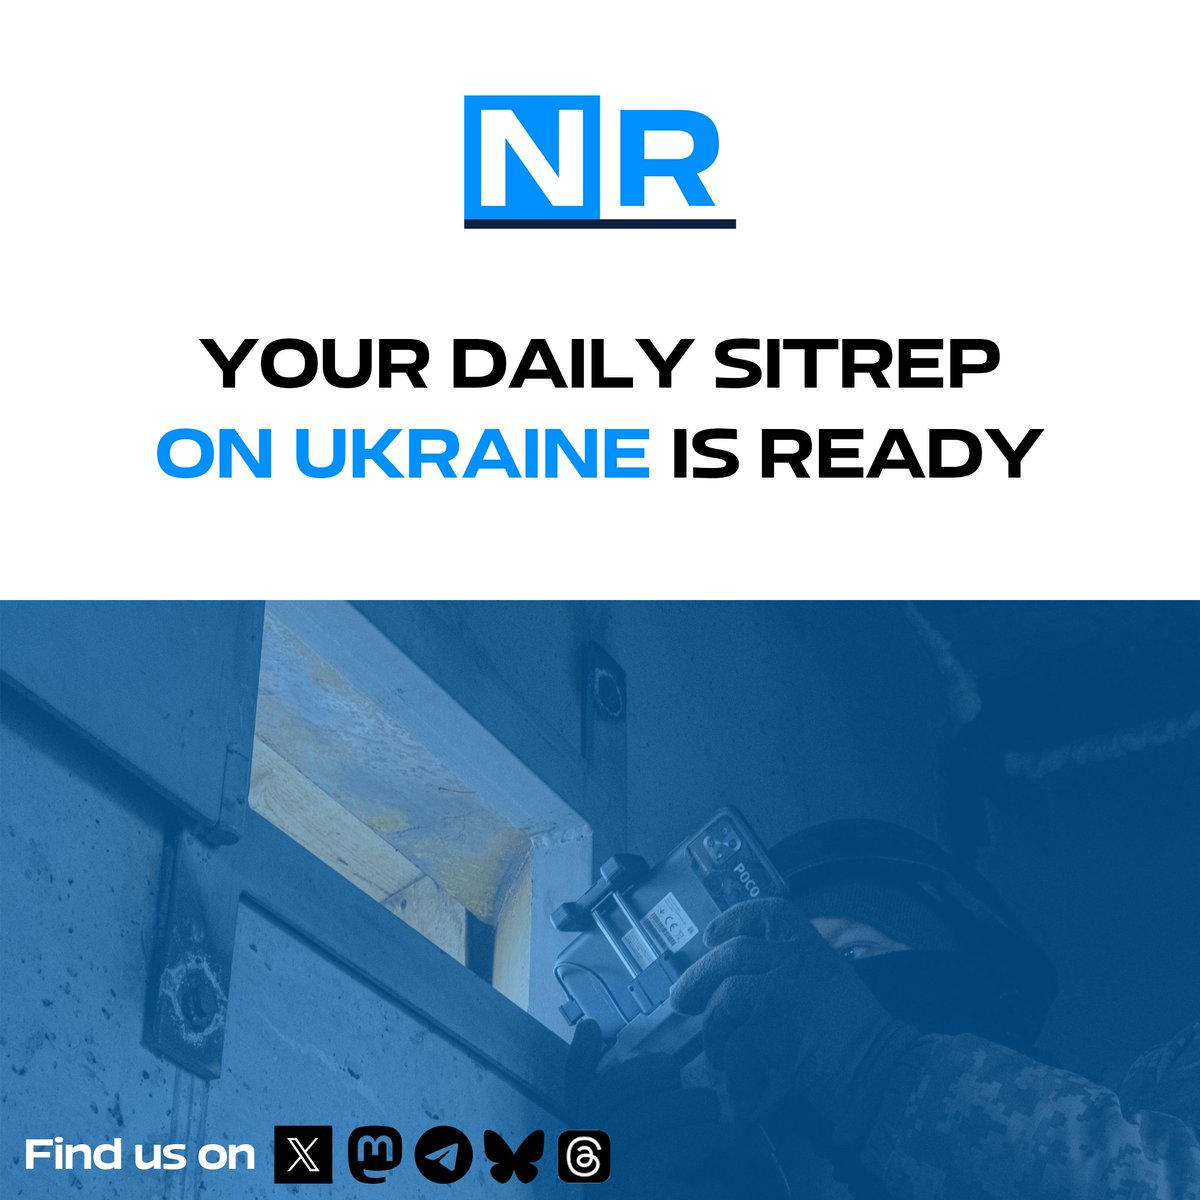 The 20/05/24 SitRep on Ukraine is ready: threadreaderapp.com/thread/1792651… Since the war broke out in Ukraine, NOELREPORTS has been reporting on the daily situation day in and day out for more than 2 years. We put a lot of effort into gathering news. This is also our motto: fast, but